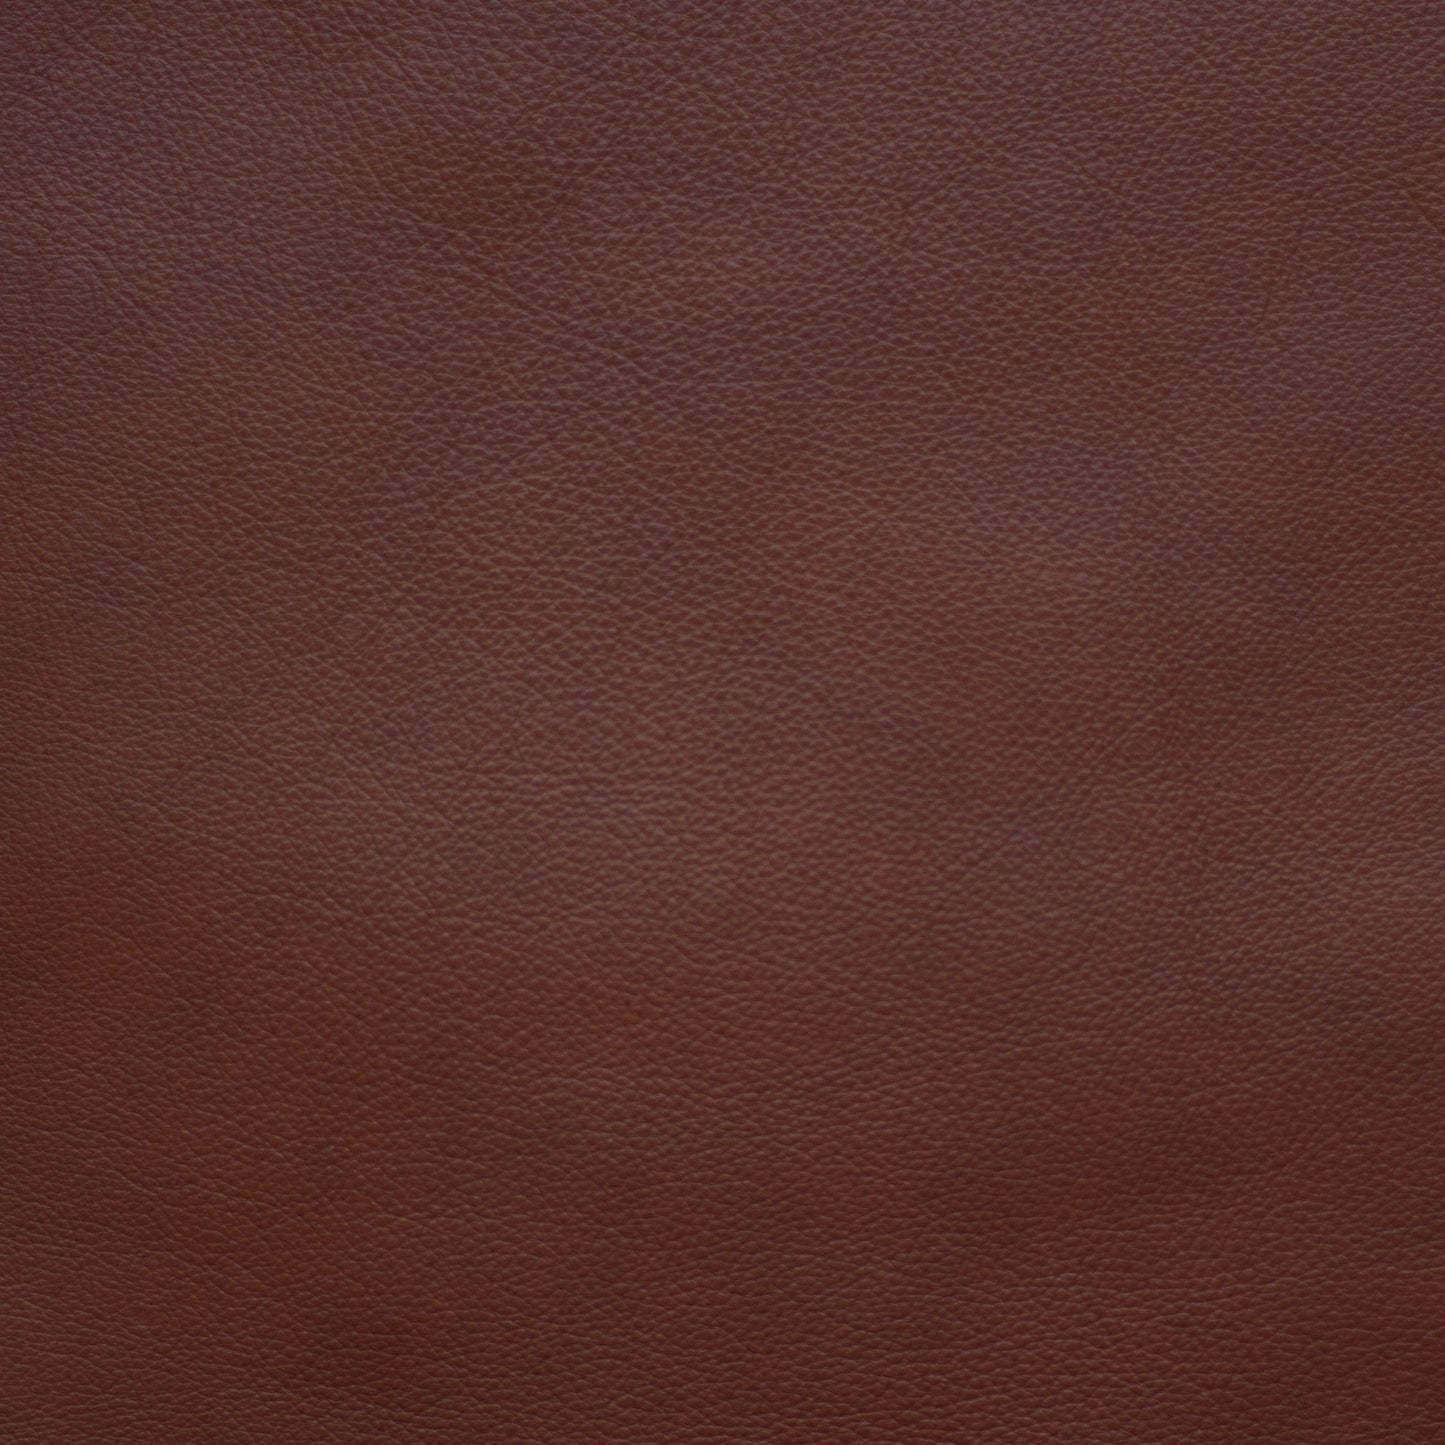 Urbane, Penthouse, Spilltop® Water Resistance, Hospitality Leather Hide